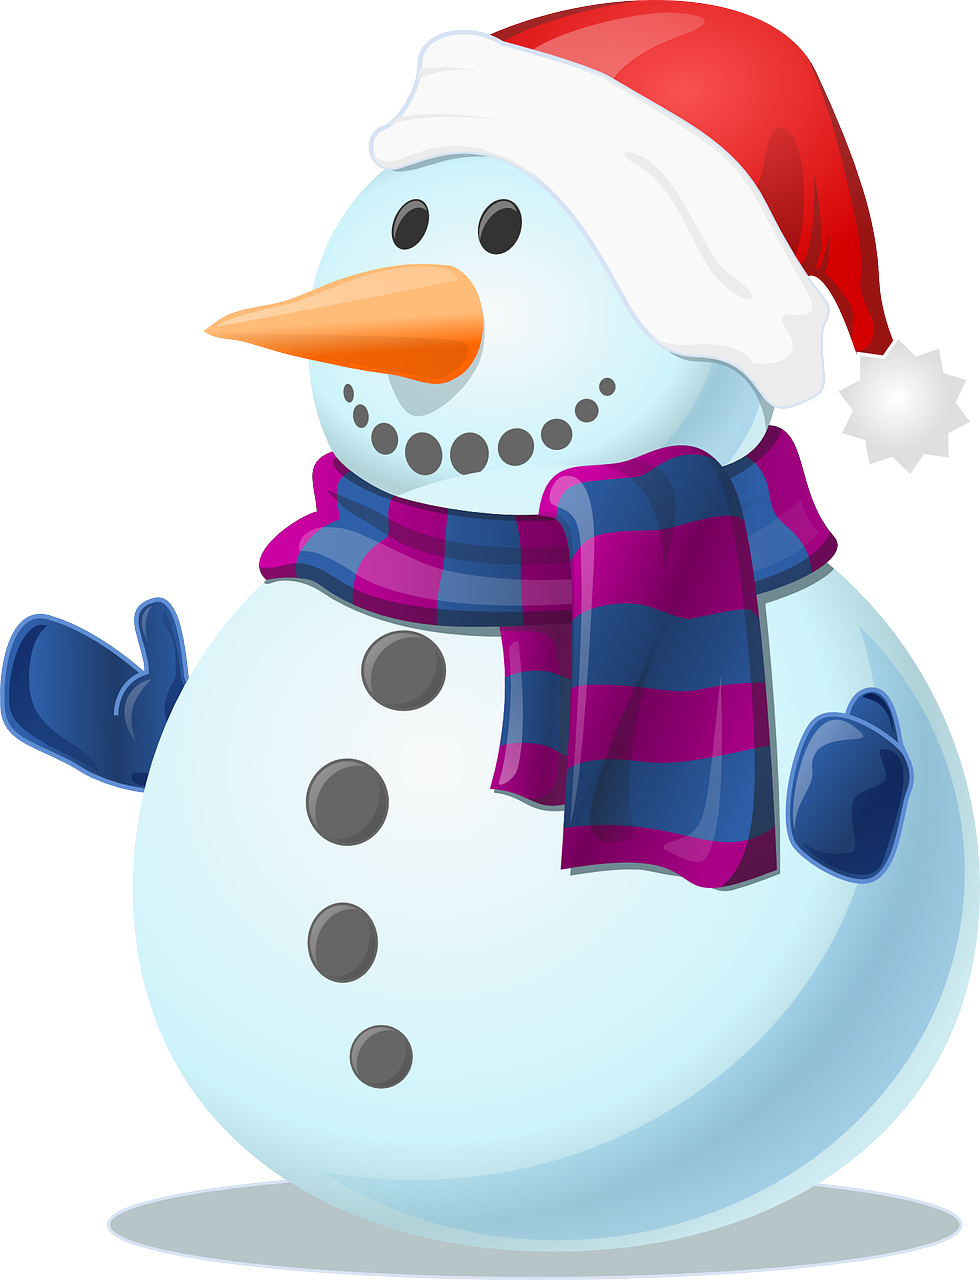 a snowman wearing a santa hat and scarf, an illustration of, shutterstock, highly detailed and colored, colorful illustration, simple illustration, three - quarter view